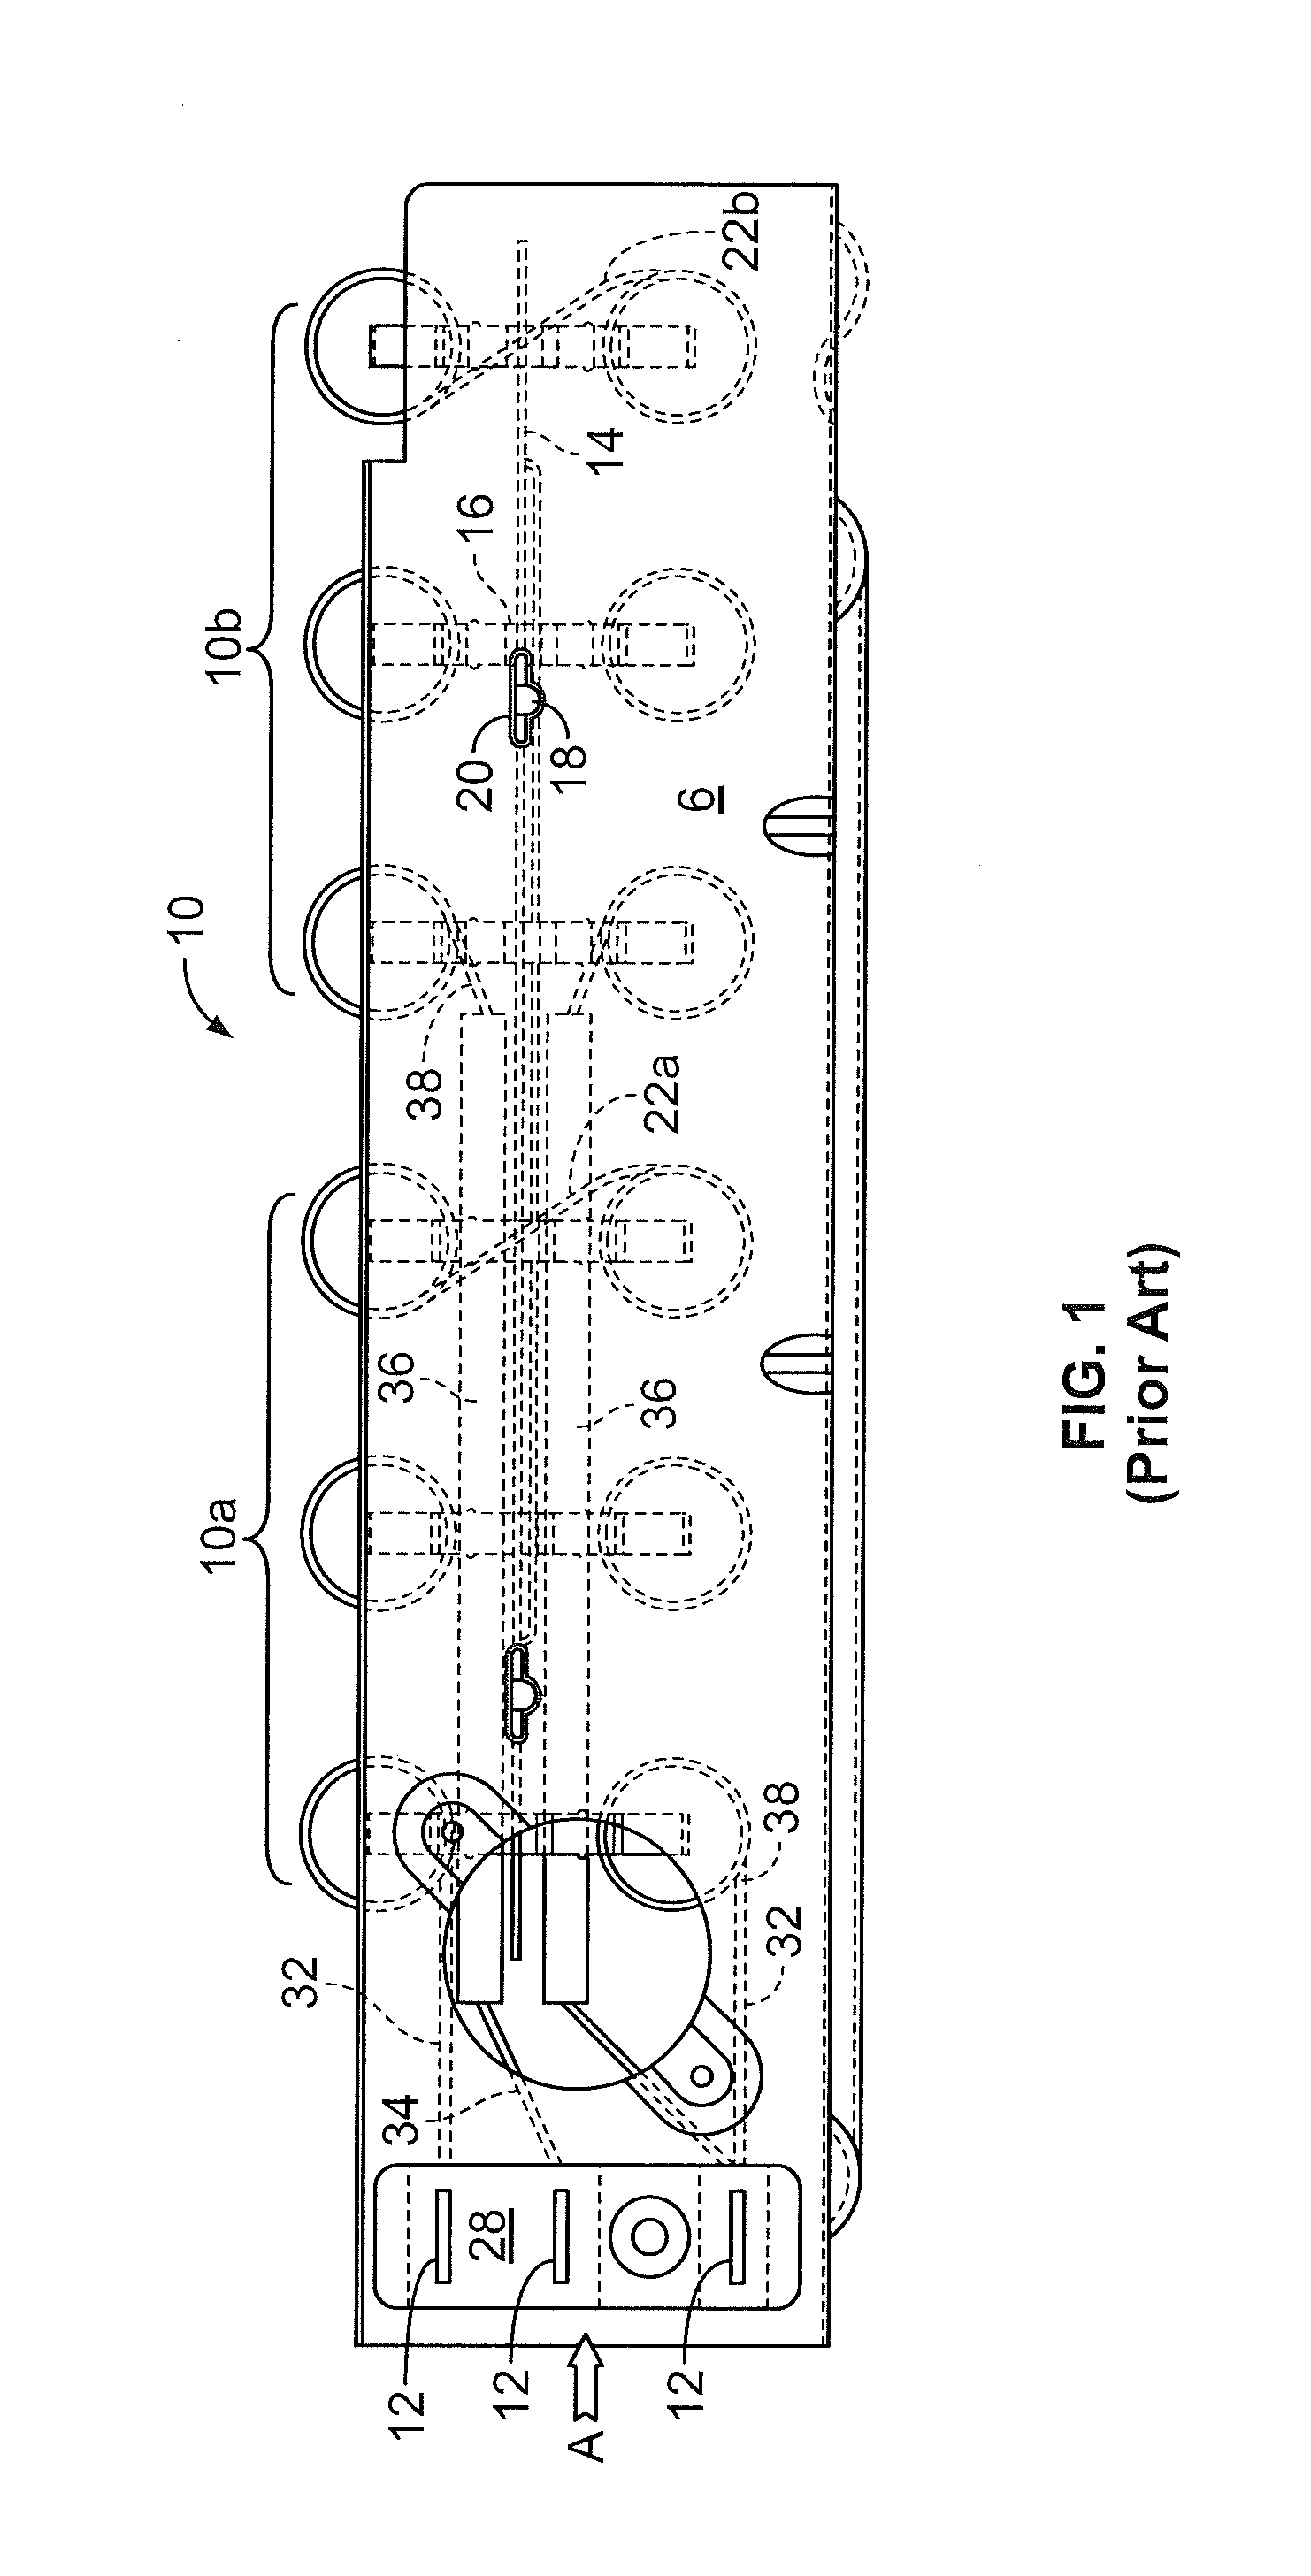 Multiple stage open coil electric resistance heater with balanced coil power arrangement and heater cool end termination and method of use